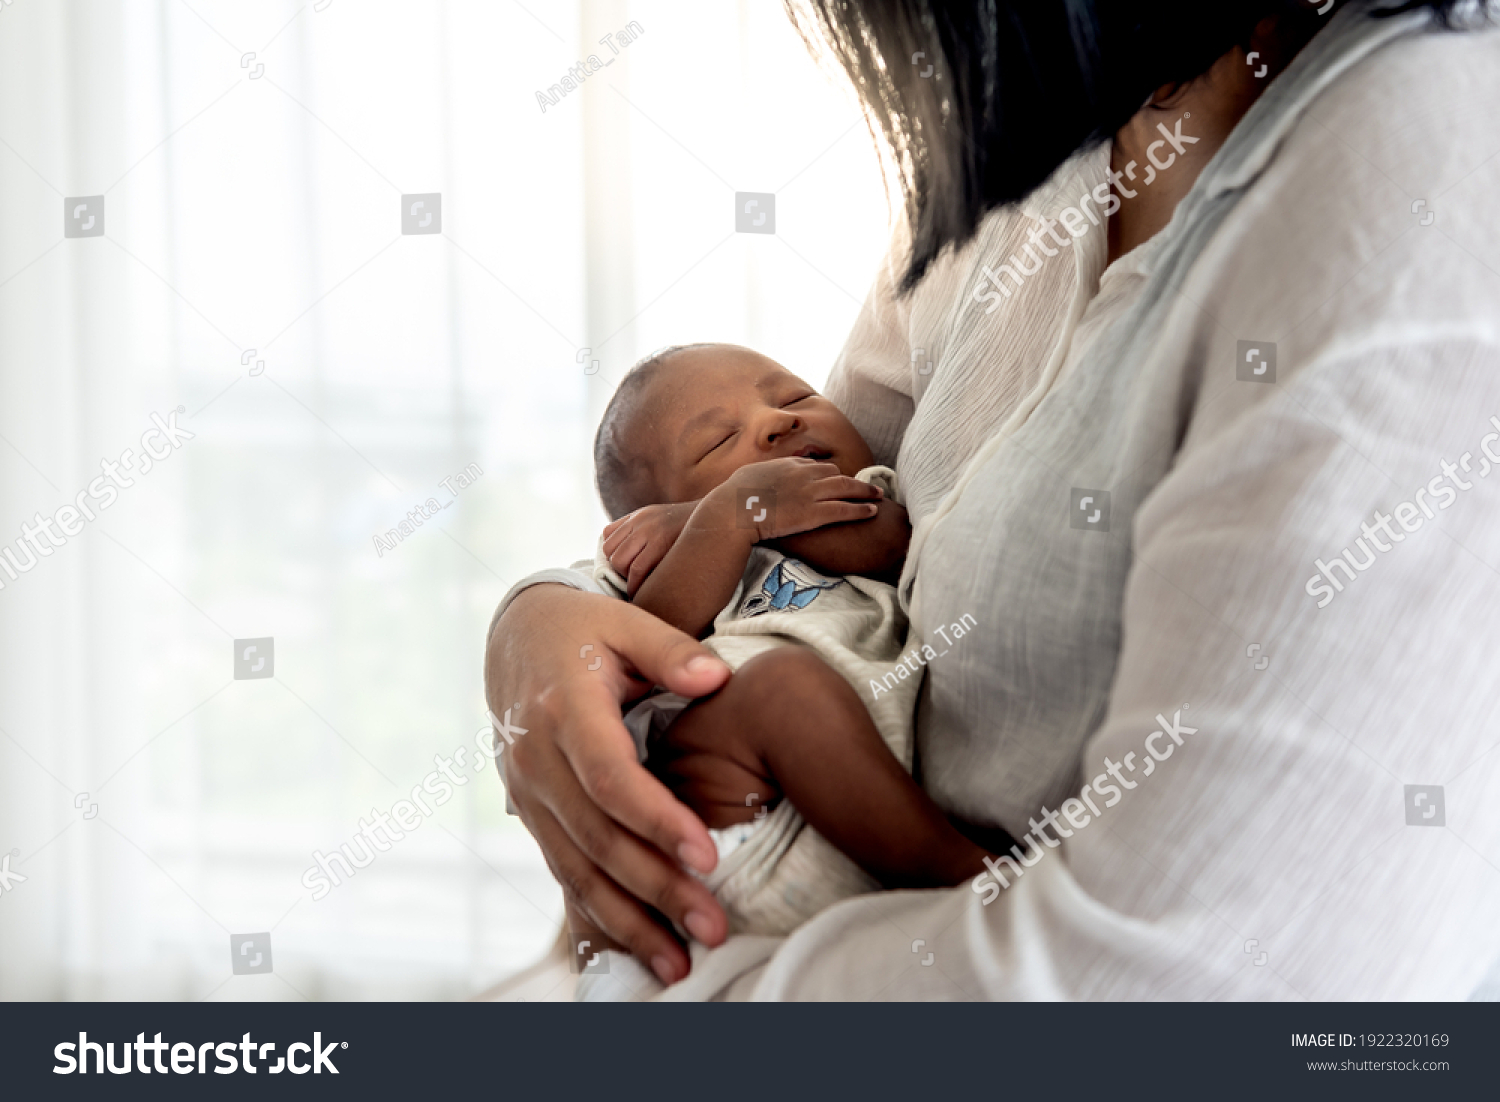 Portrait images of half African half Thai, 12-day-old baby newborn son, sleeping with his mother being held, to family and infant newborn concept. #1922320169